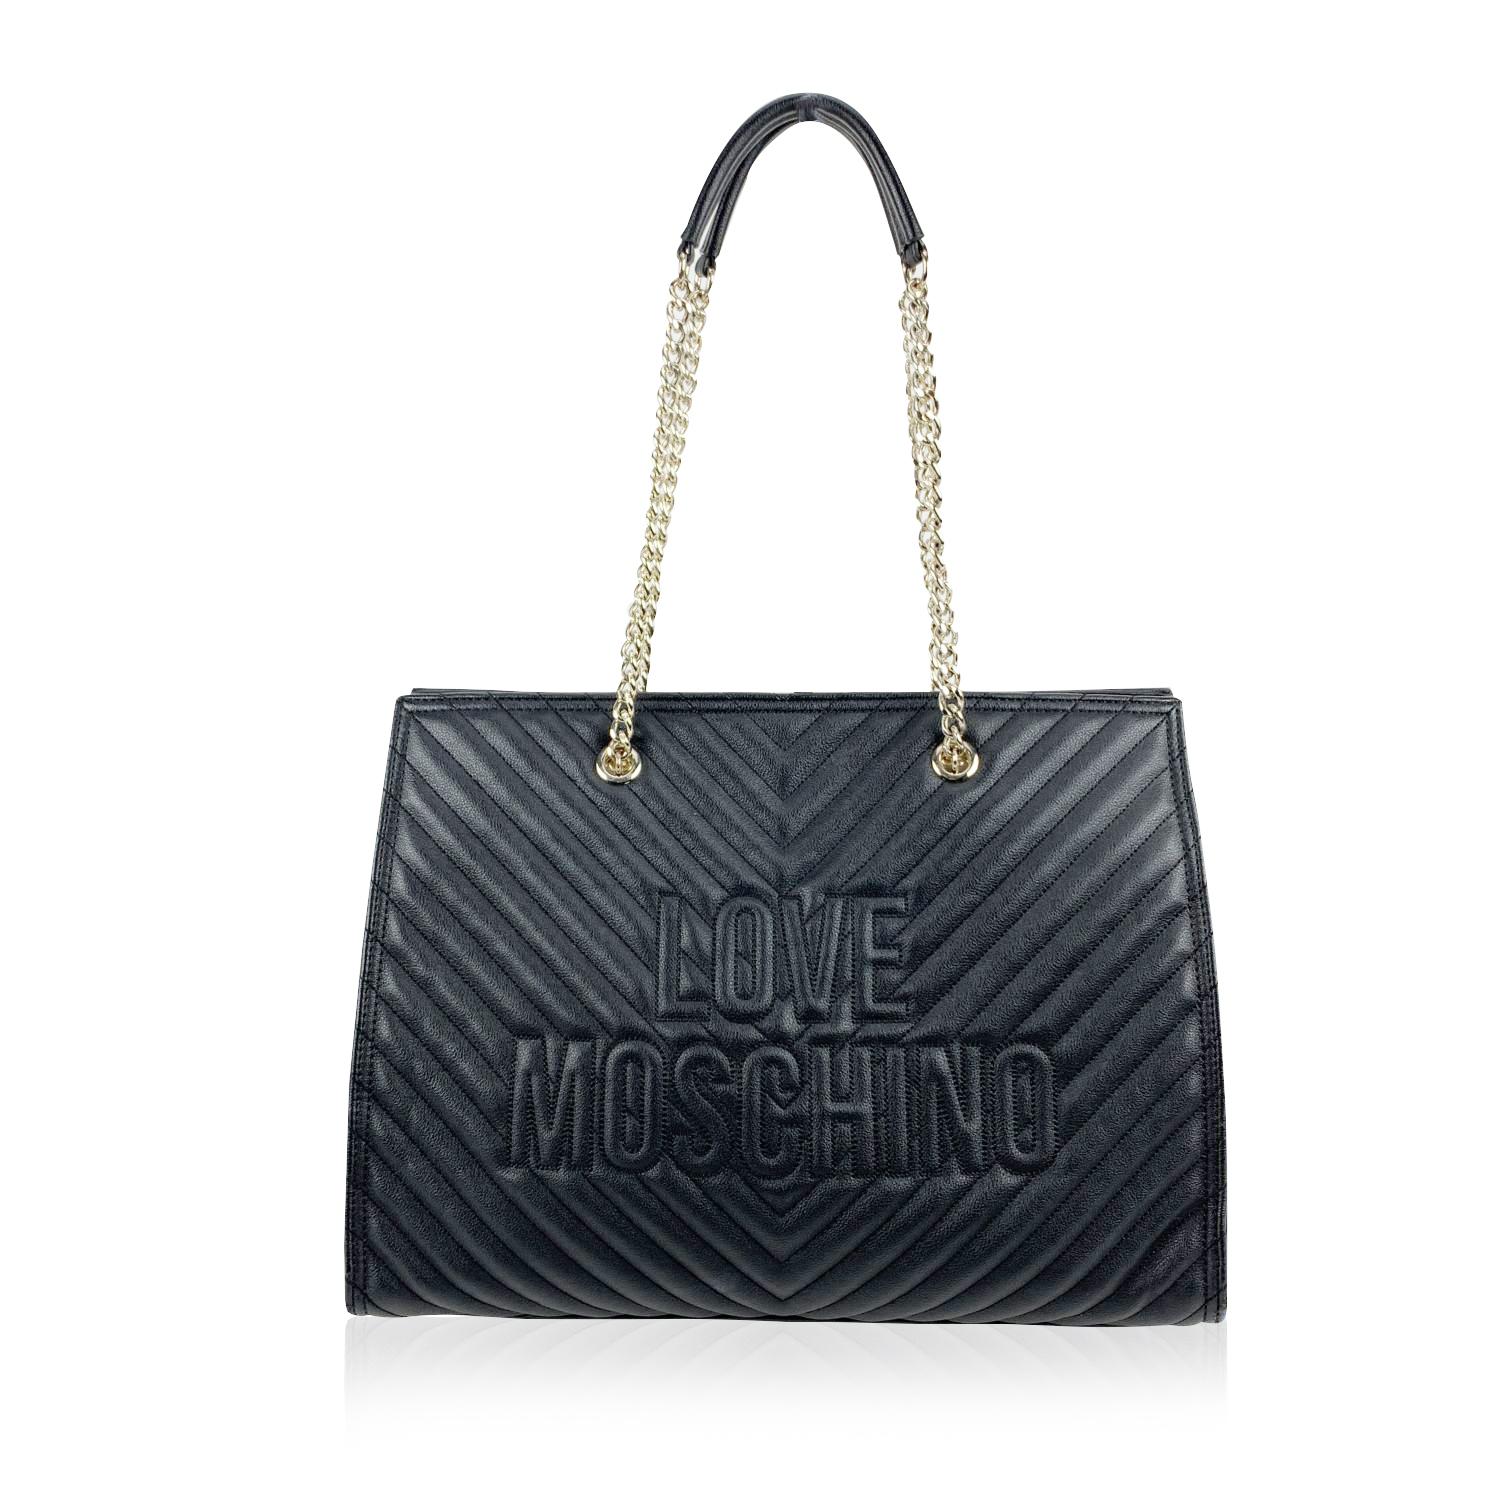 Love Moschino black leather-look canvas tote bag with chevron quilting. It features double chain and leather strap, 'Love Moschino' logo on the front and magnetic button closure on top. Red satin lining. 1 middle zip section and 2 side pockets.